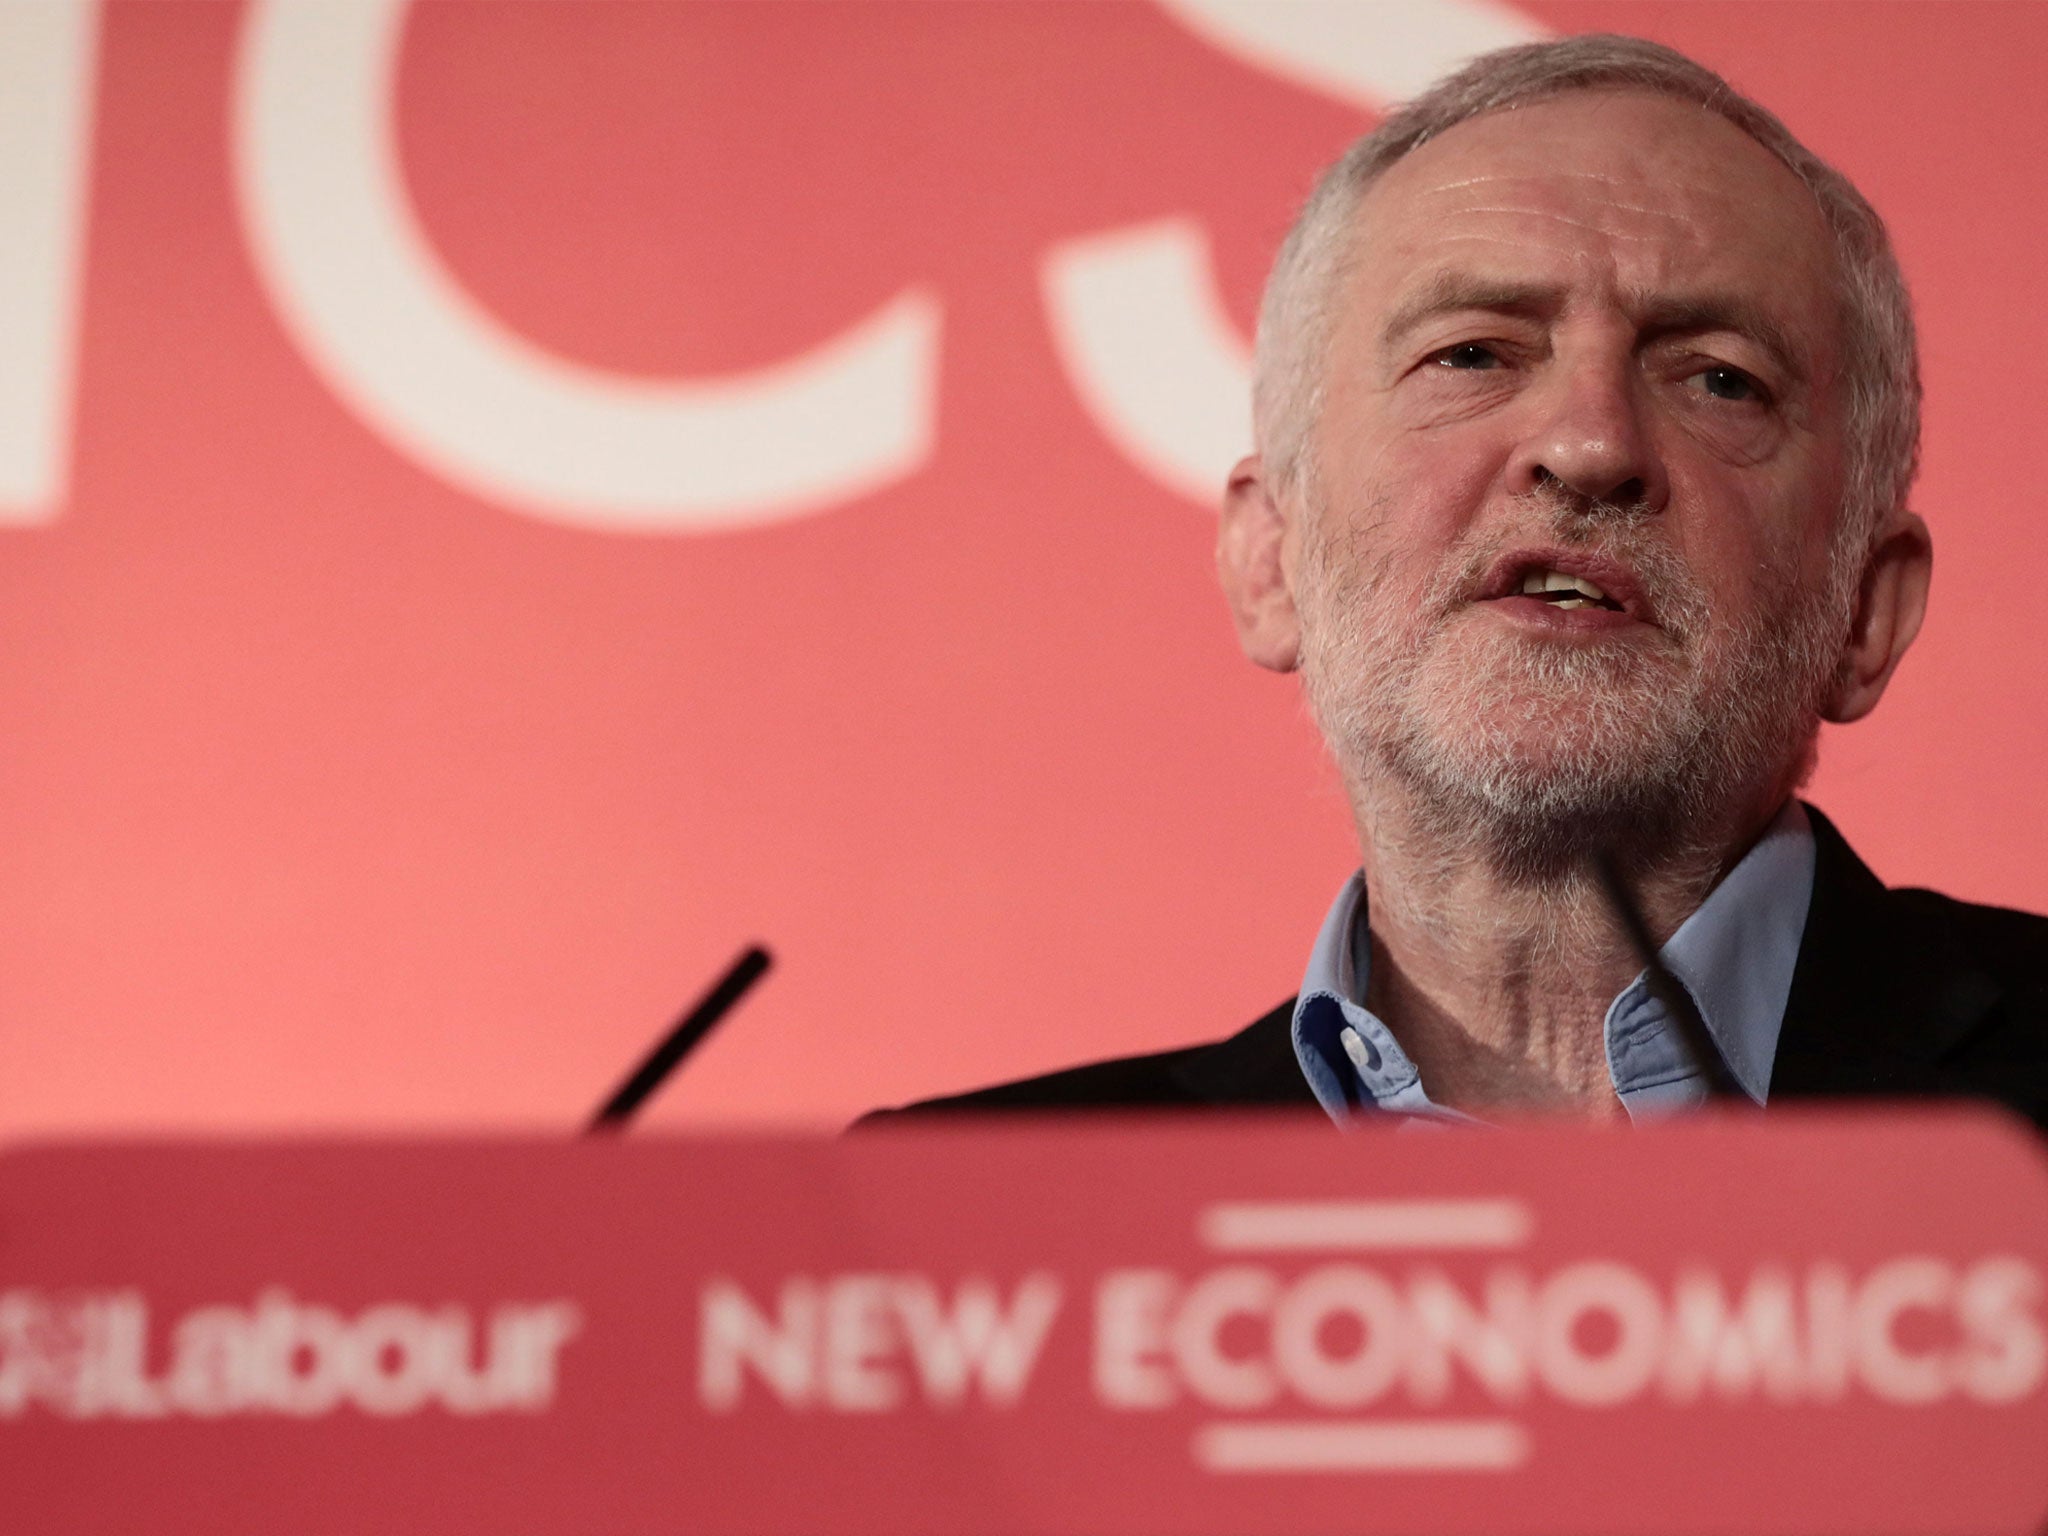 Jeremy Corbyn dismissed allegations over his links to Soviet states as 'ridiculous smears'